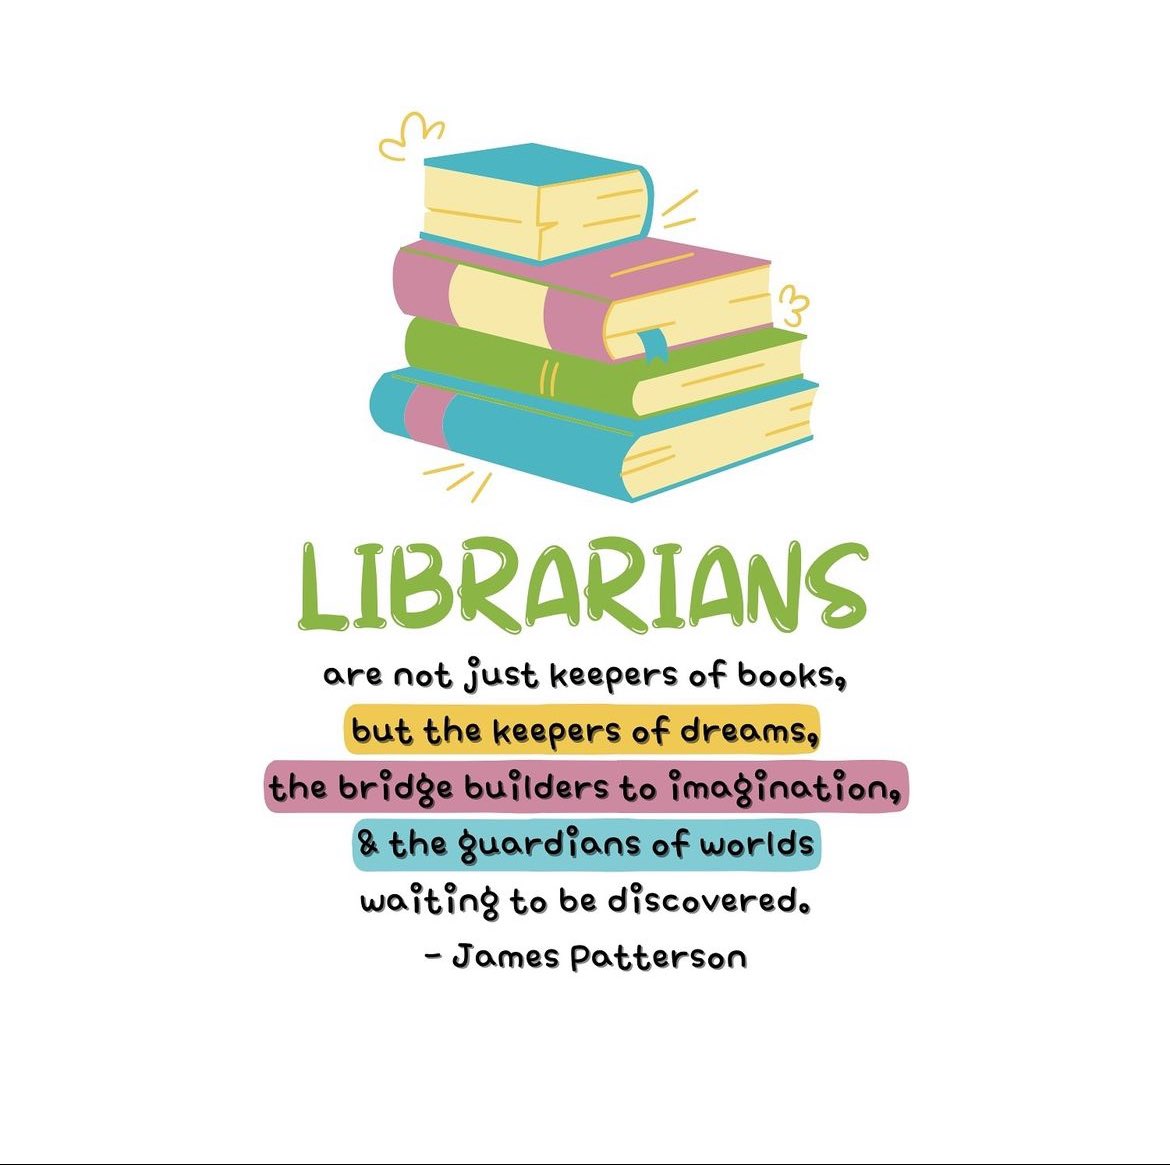 I wanted to wish a happy appreciation day to all my librarian friends. I have learned so much and I’m grateful for them. Also, thank you to my family, in-laws, and admin who celebrated me these past two days. @jortiz_P_ @YISDLibServices @mmaldonado112 @plarabazan